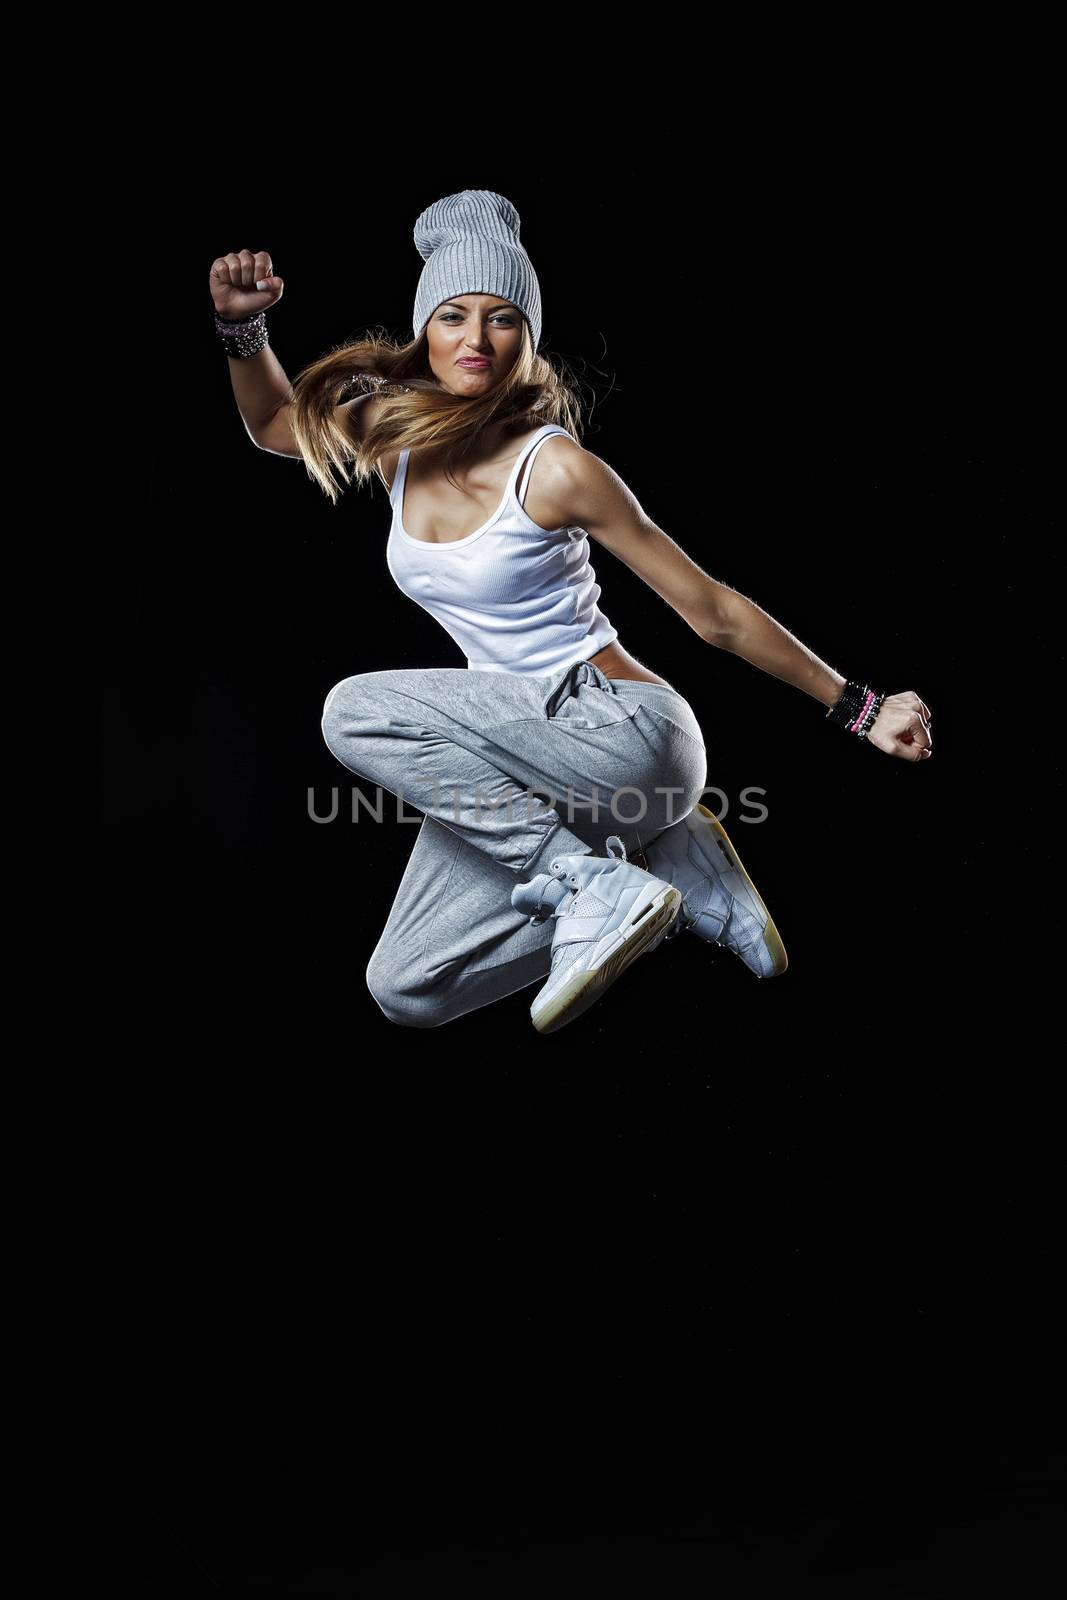 Beautiful model is jumping high on the black background. Studio shot